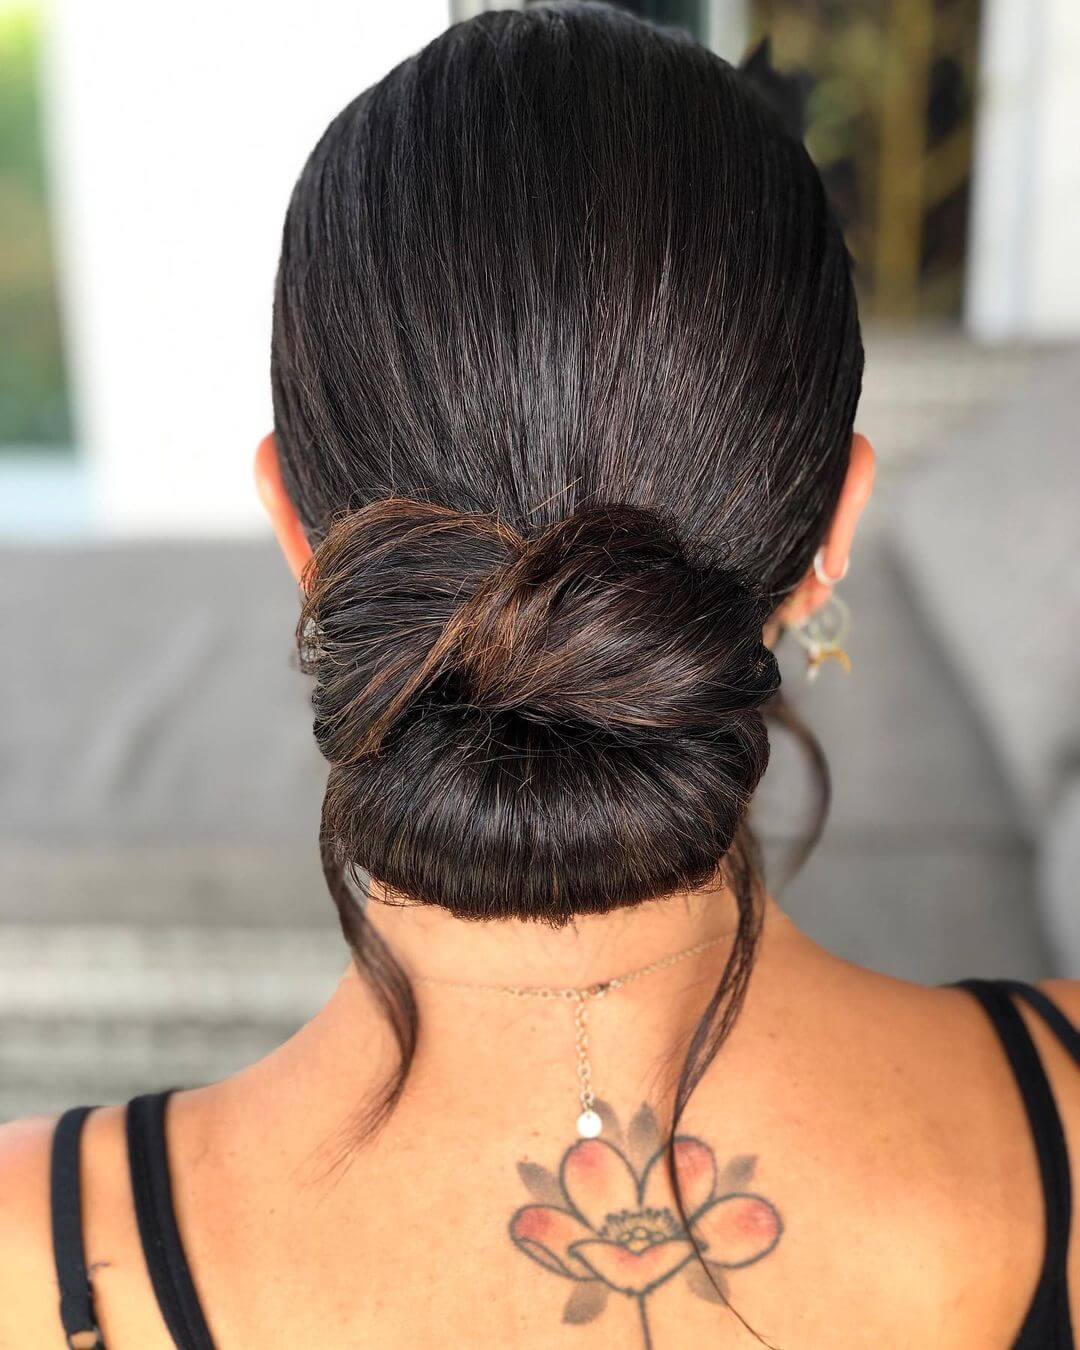 Different Bun Hairstyle that are Easy to Make Go for the careless bun look